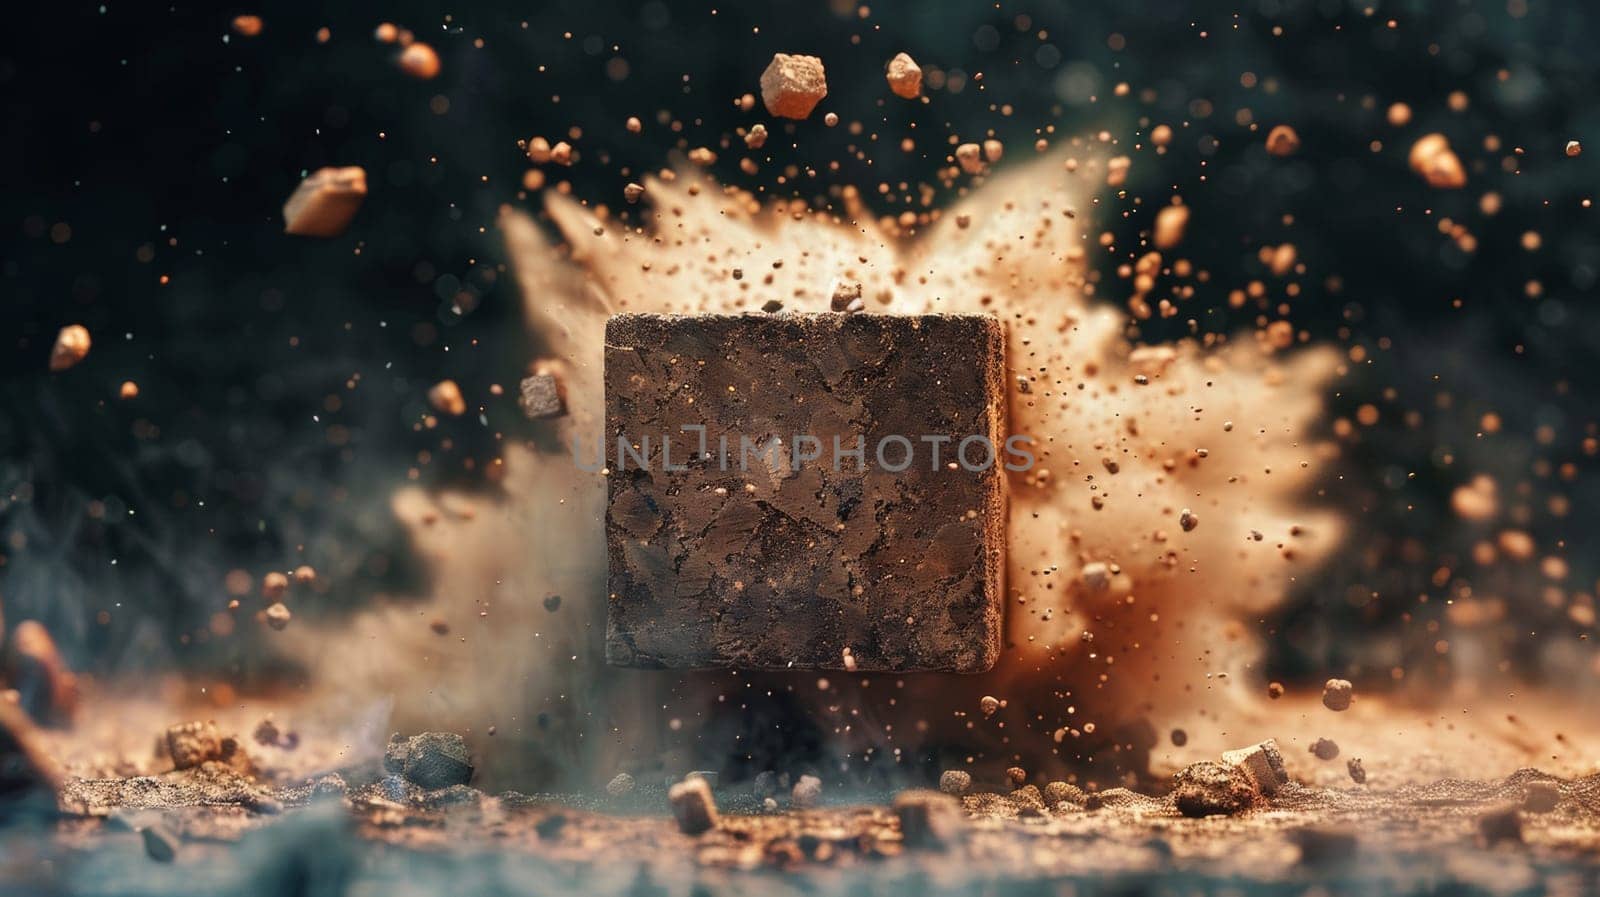 A close up of a brick being thrown into the air